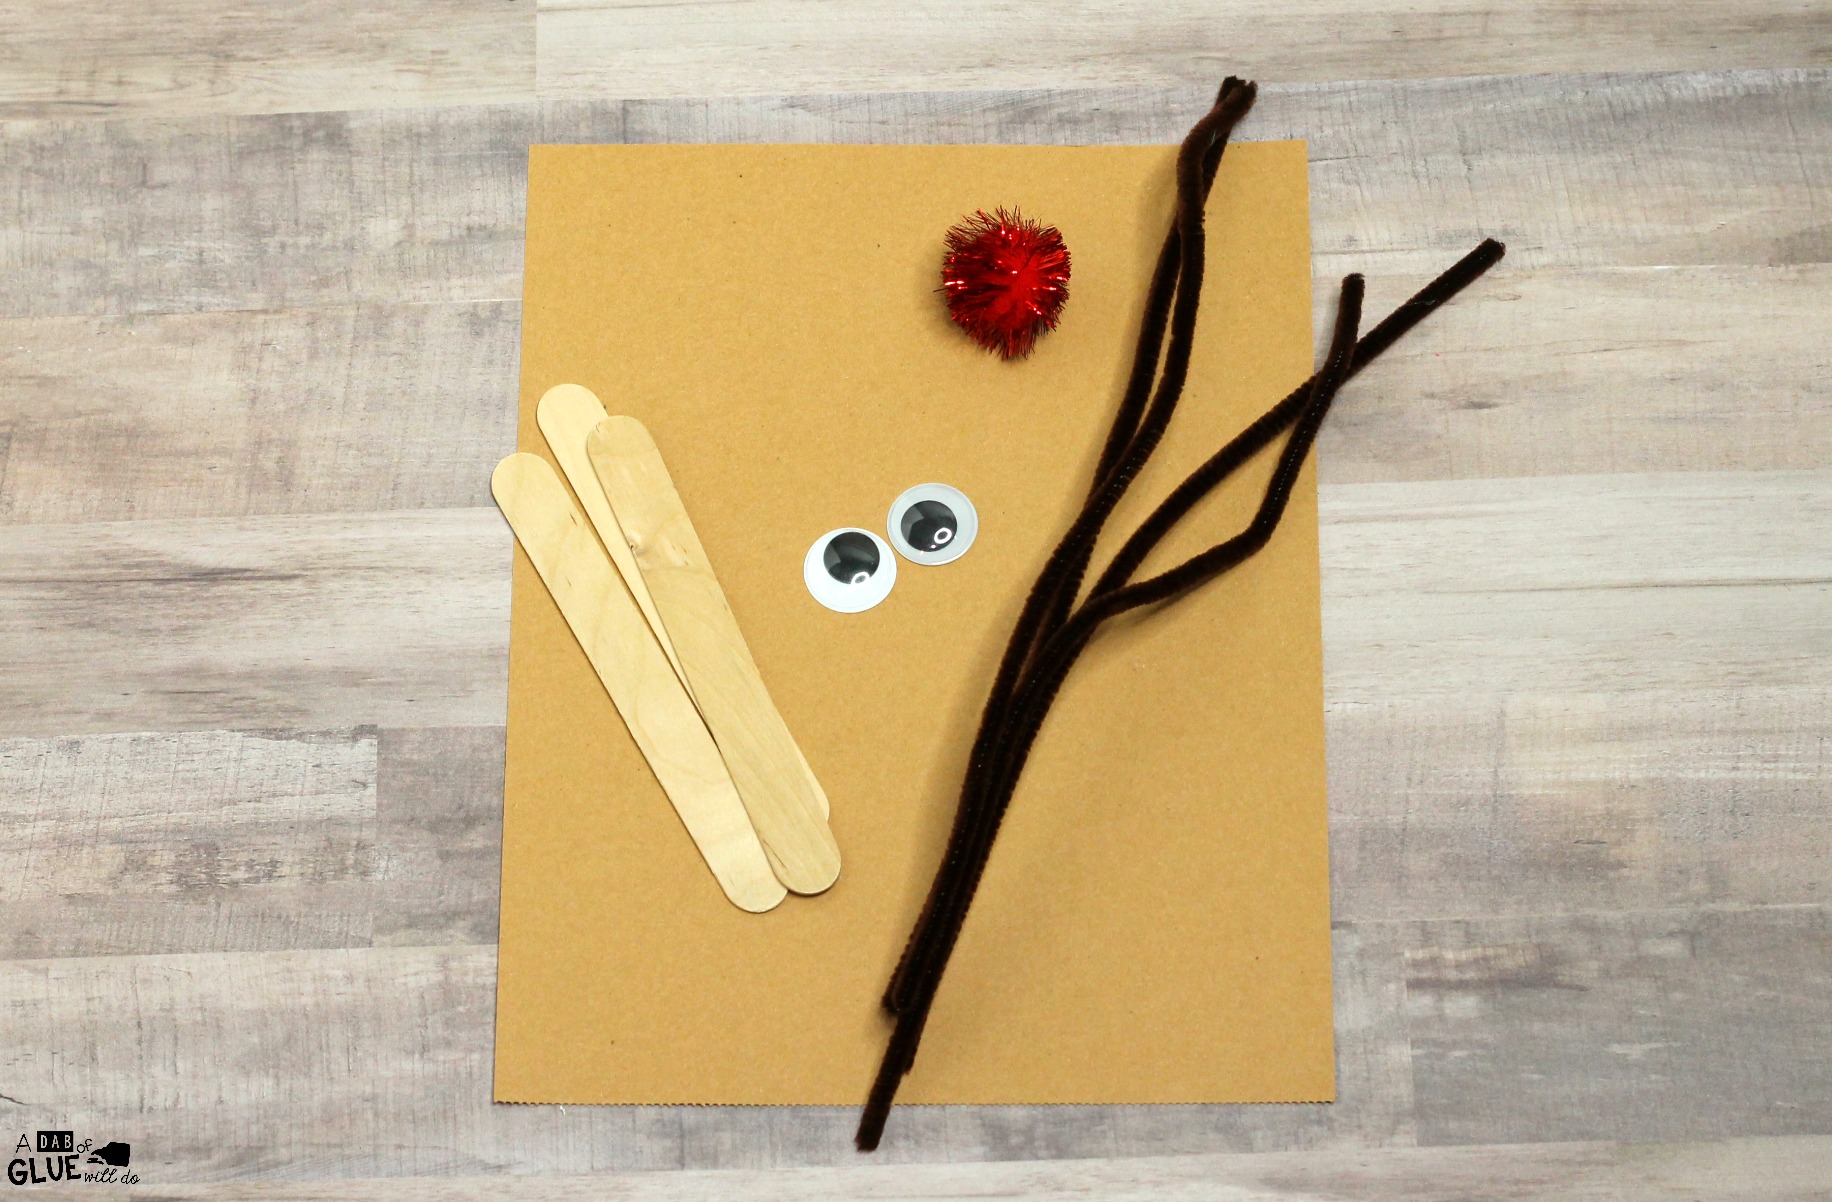  To go along with our reindeer unit study, we made this Craft Stick Reindeer Craft. This craft is the perfect addition to your unit study and adorable classroom decoration.